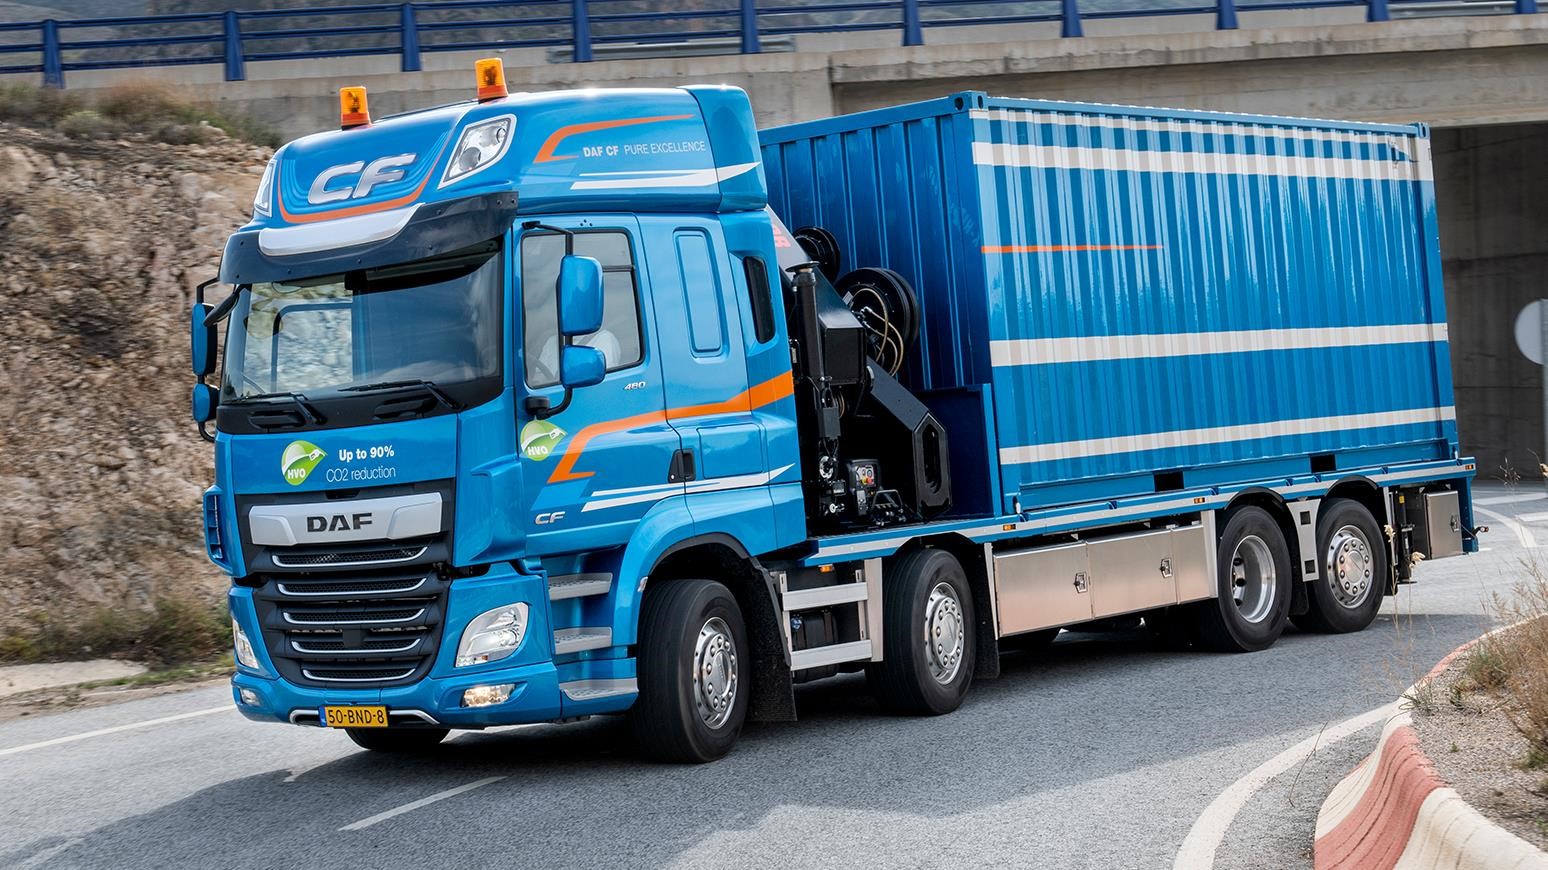 Hampshire-Based Pump & Plant Hire Specialist Adds Six New DAF CFs, A Mix Of 6x2s & 8x2 Rear-Steer Trucks